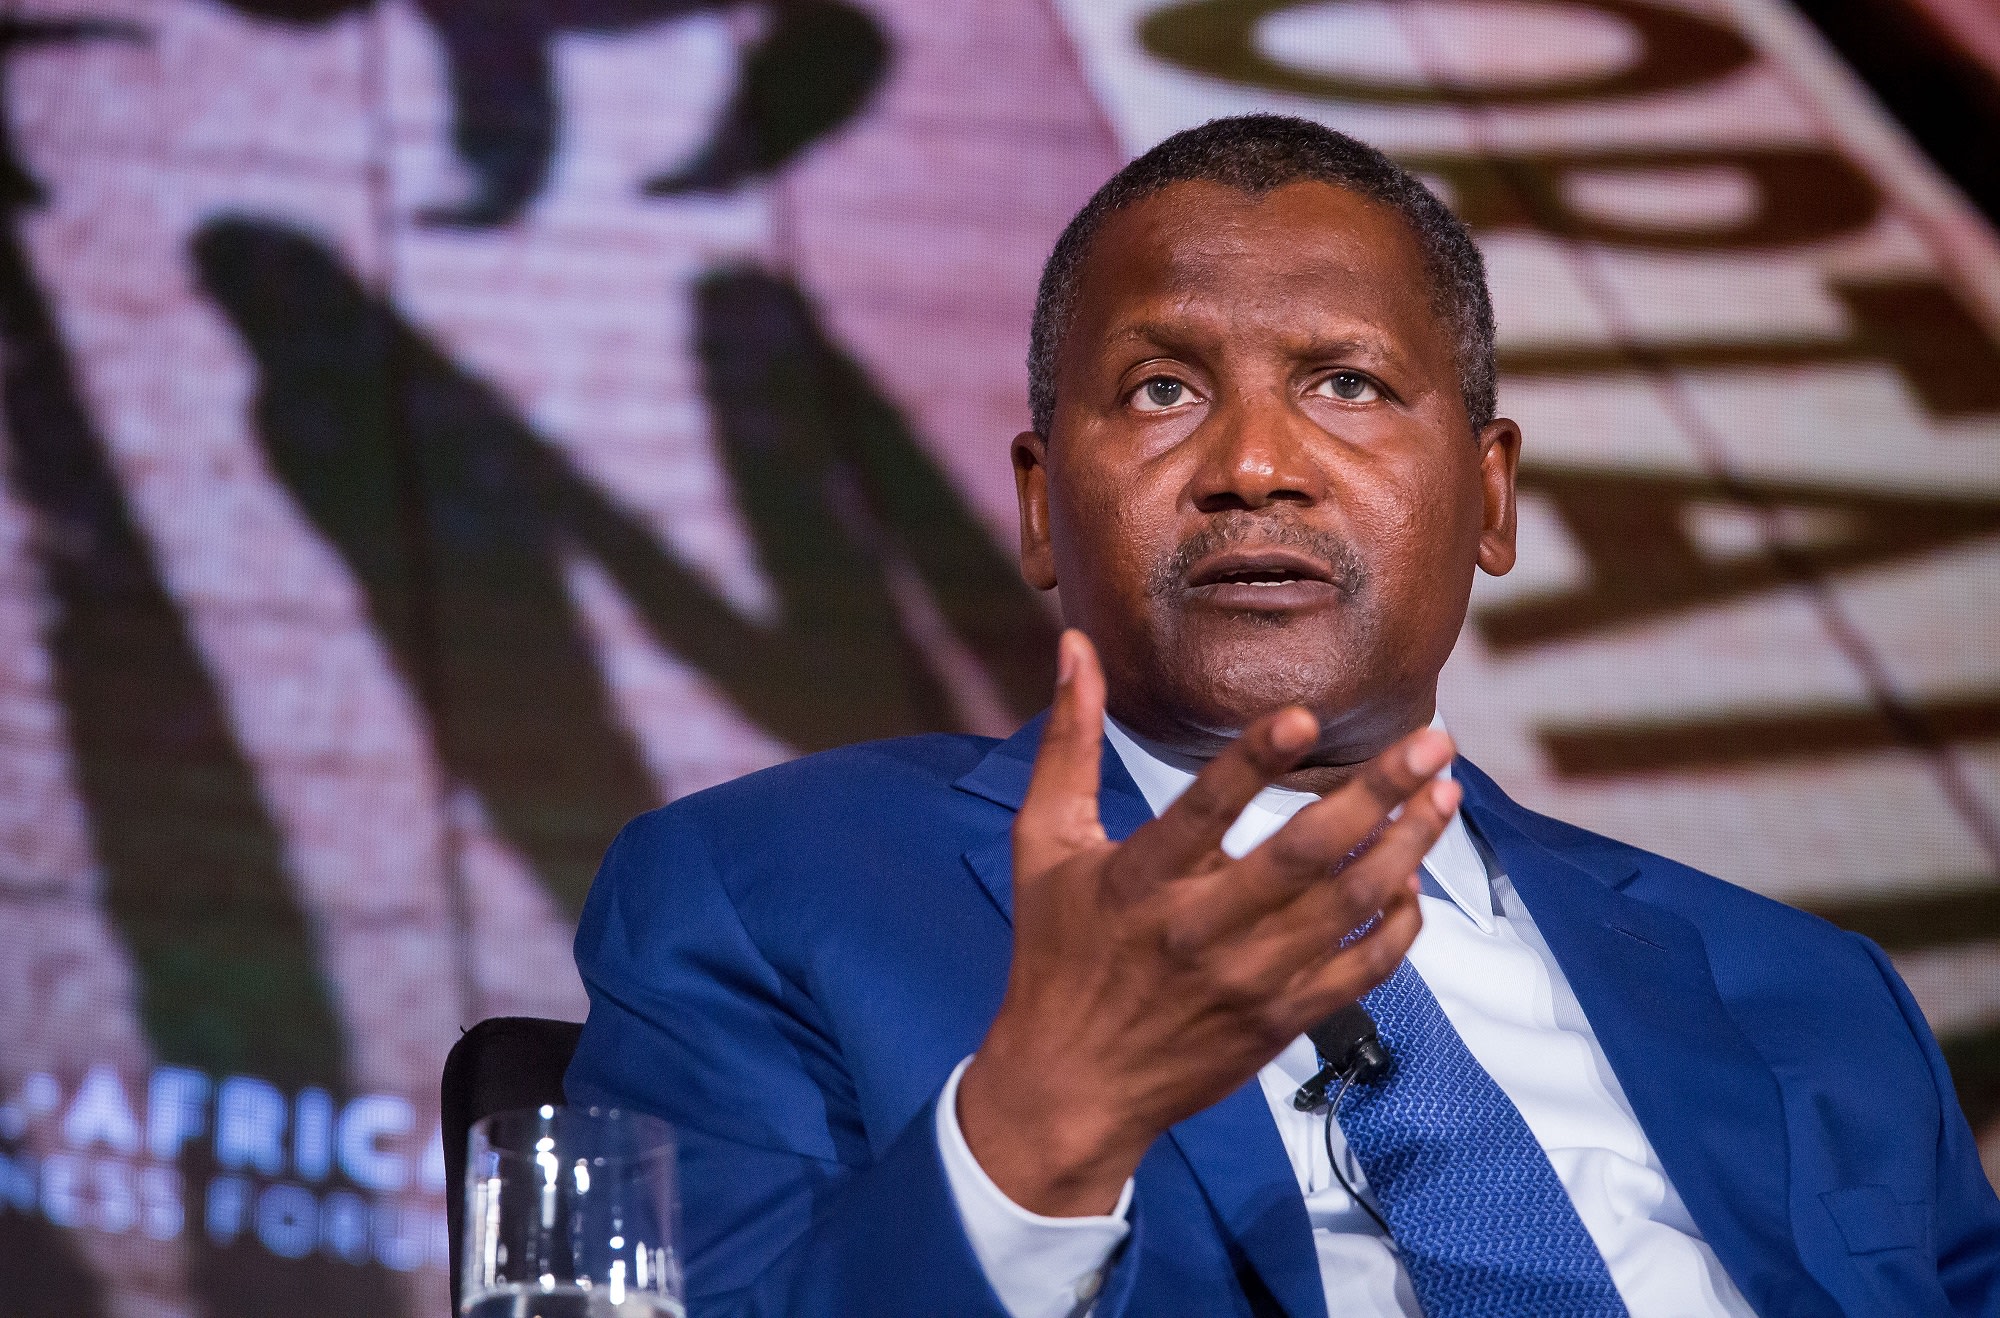 Aliko Dangote is urging governments across Africa, the Federal Government of Nigeria, and State governments to increase their budget allocations to the healthcare sector, to help ensure improved basic healthcare for the people